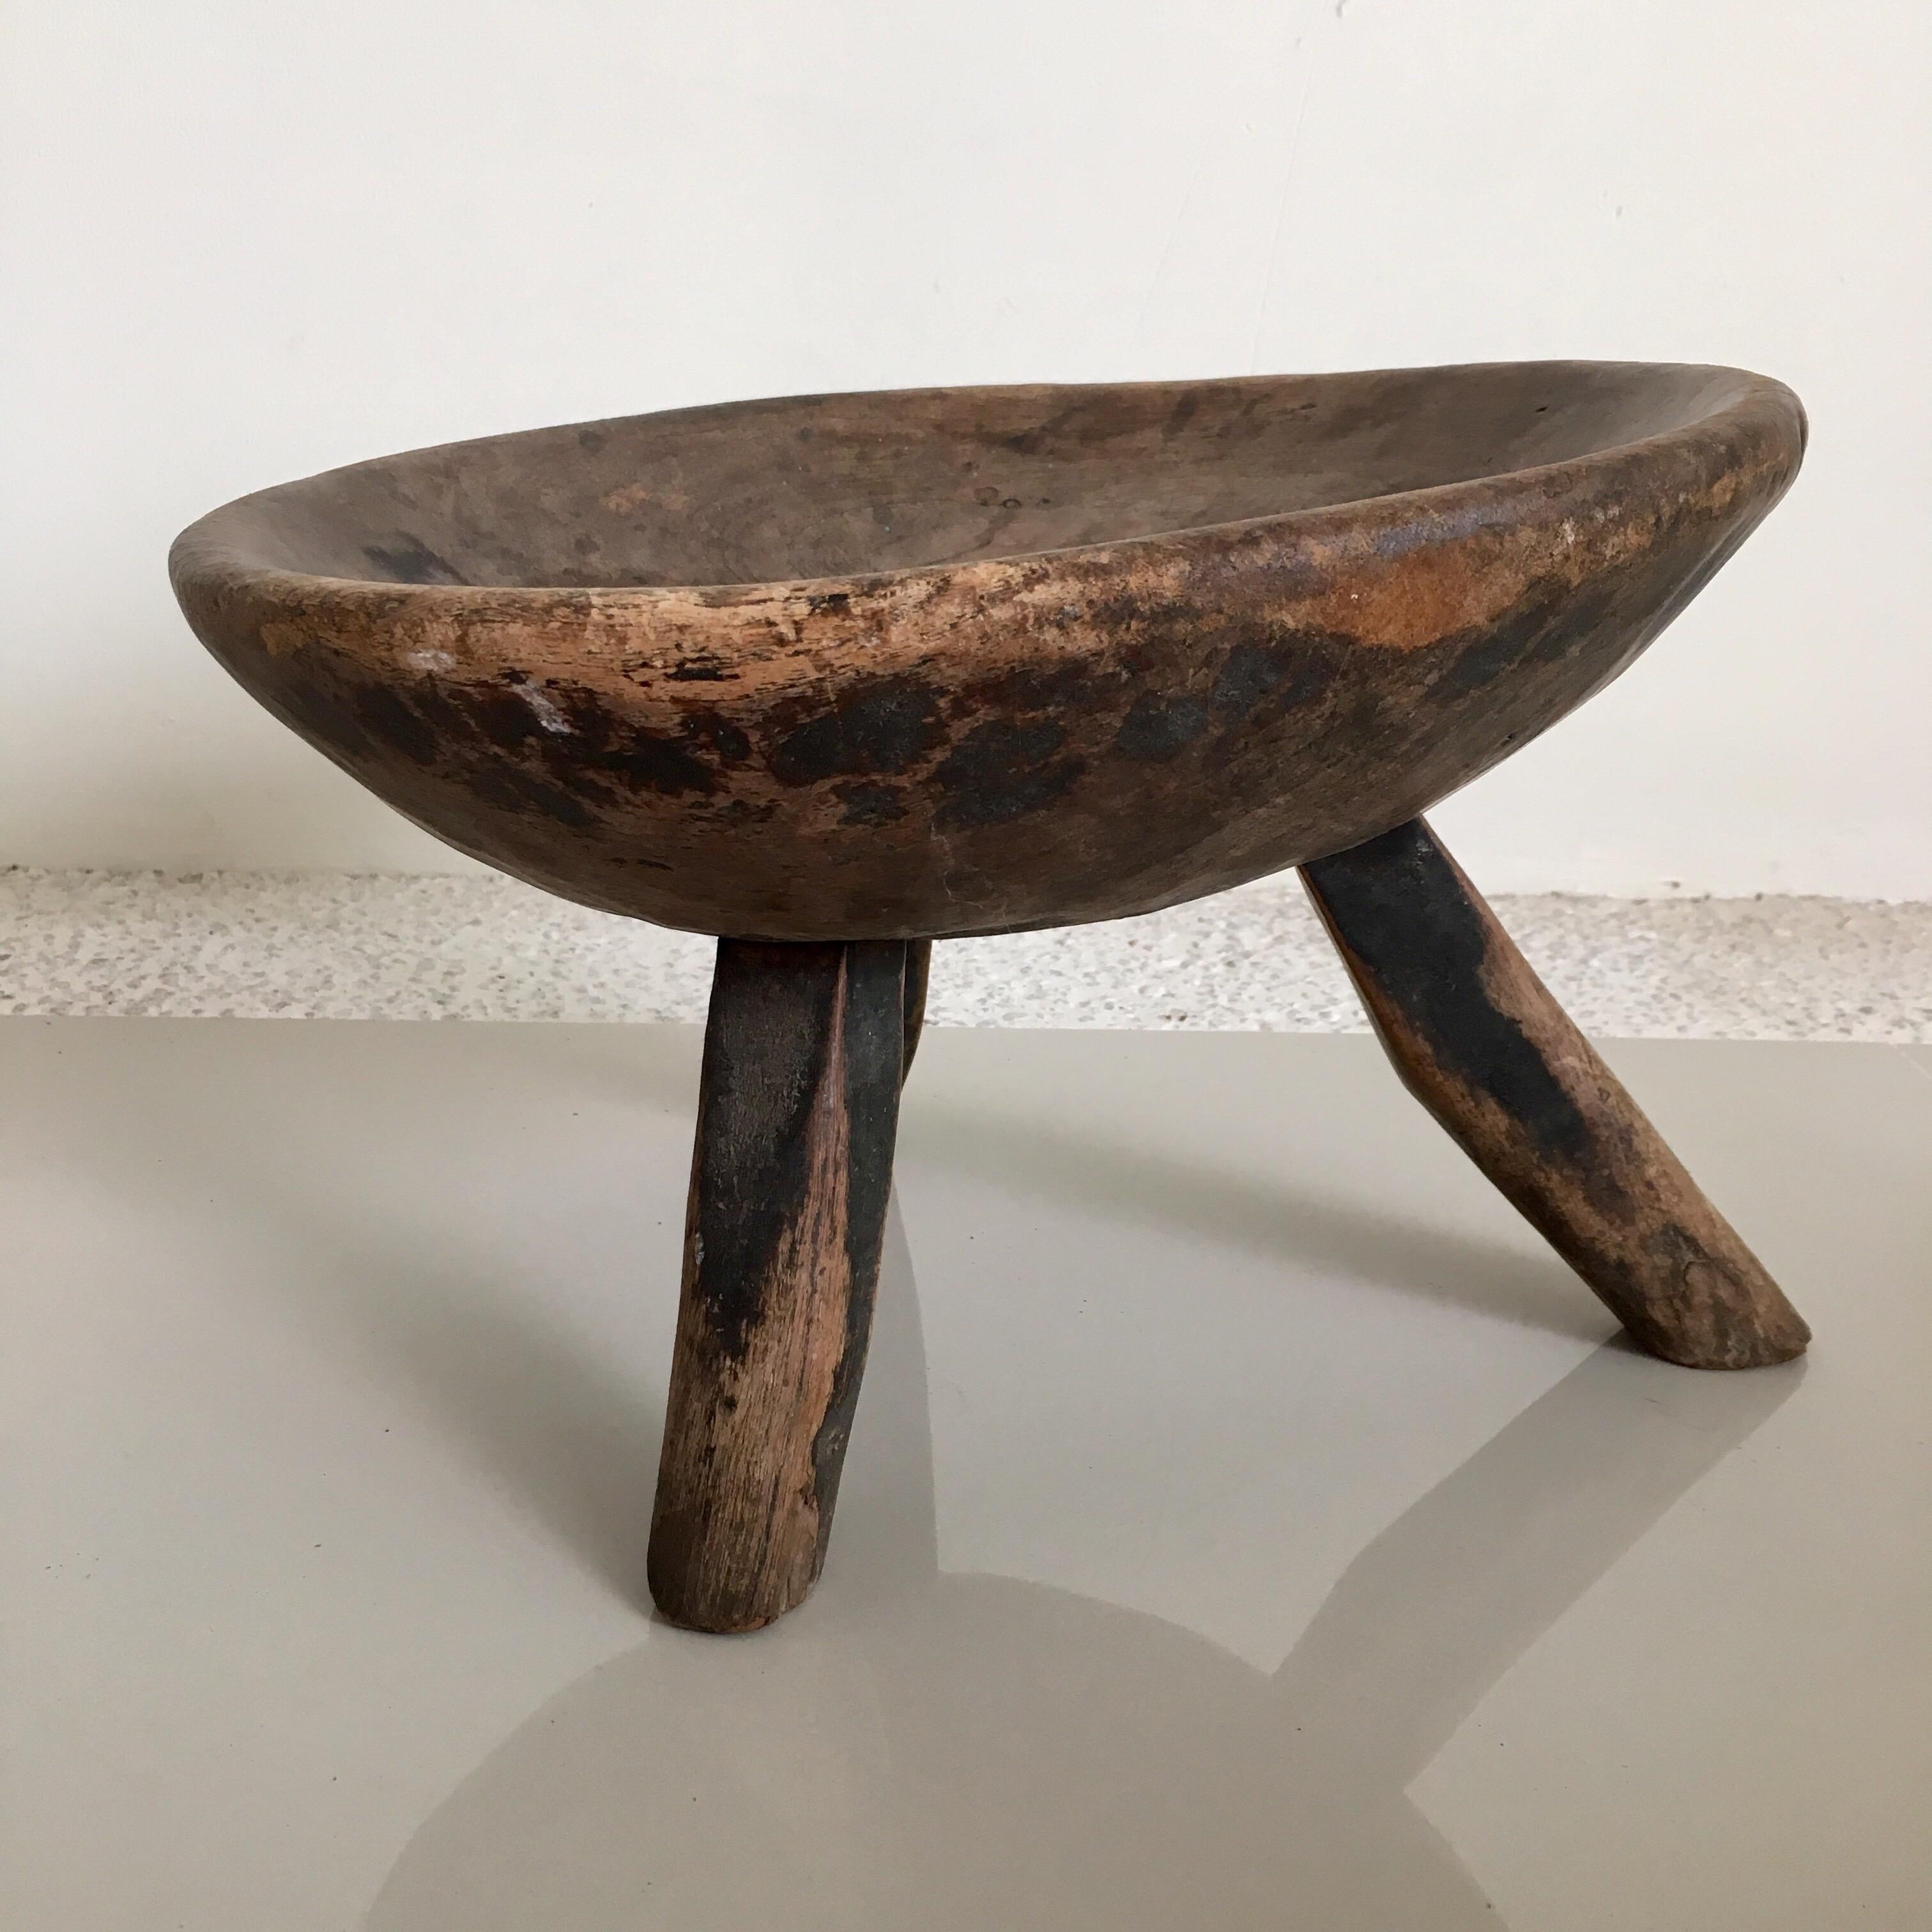 Mexican Dome Stool from Mexico